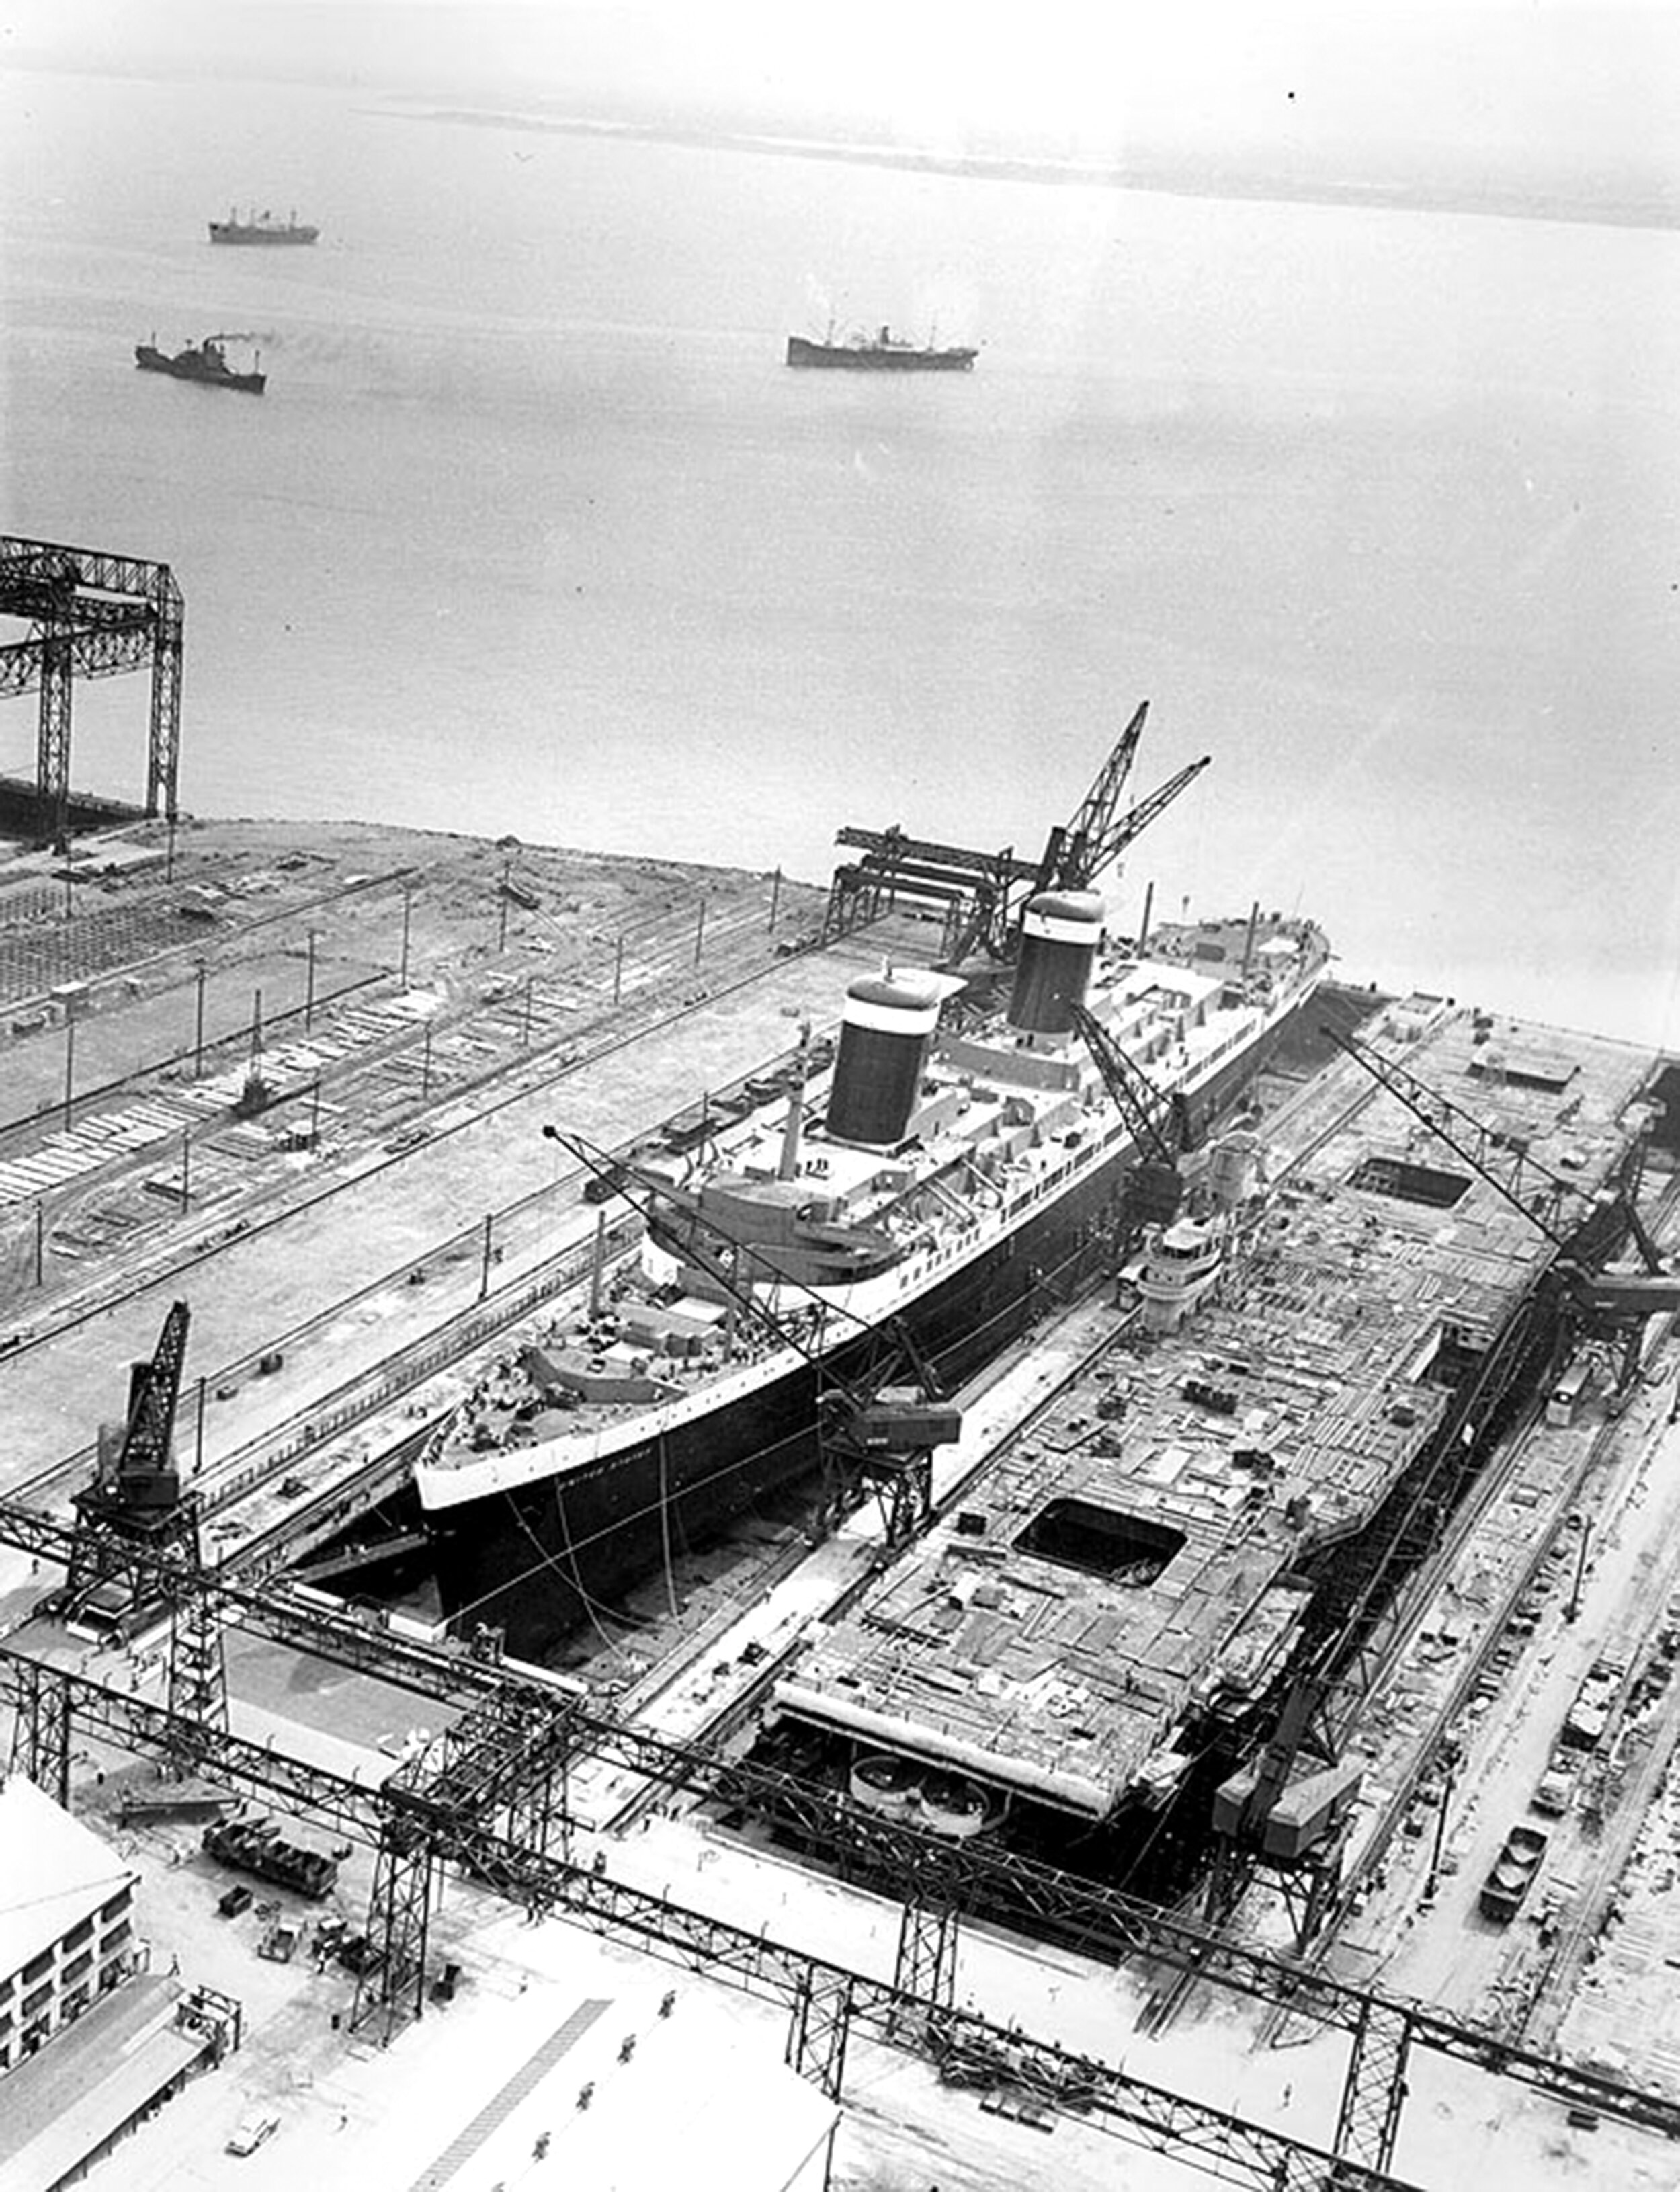 The SS United States under construction